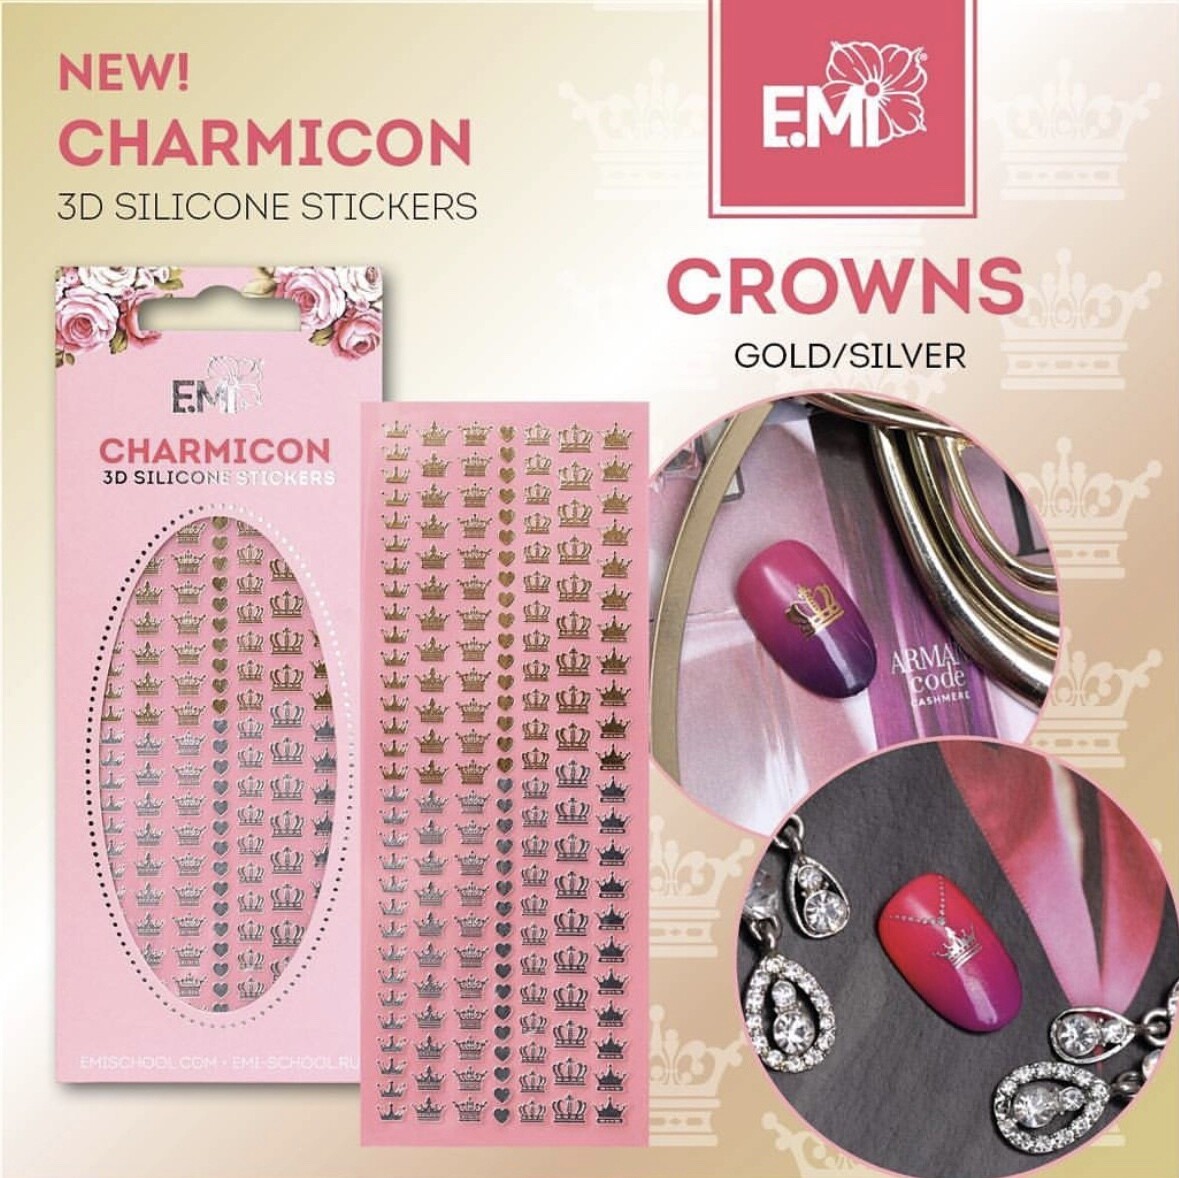 Charmicon Silicone Stickers Crowns Gold/Silver